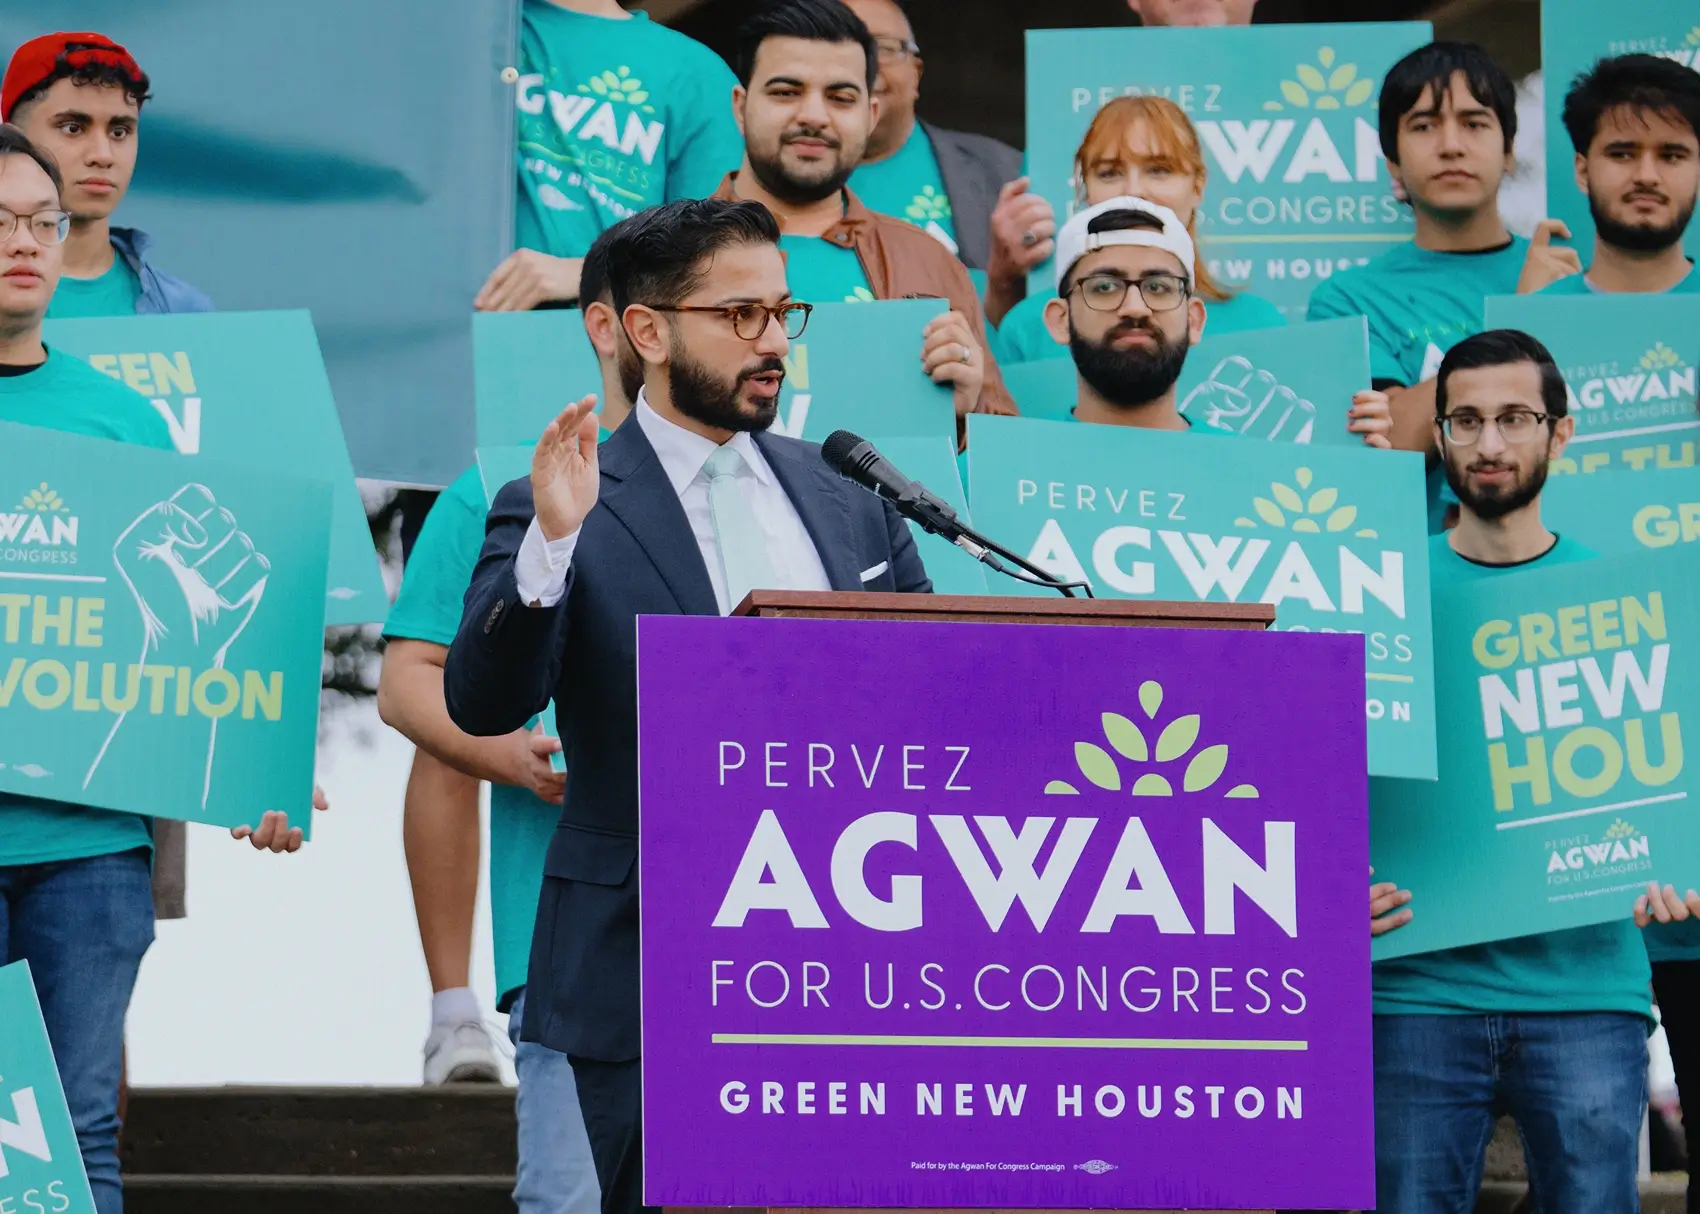 A lawsuit filed by a former campaign worker accuses congressional candidate Pervez Agwan of assault, battery and false imprisonment. Agwan is pictured at a campaign rally.